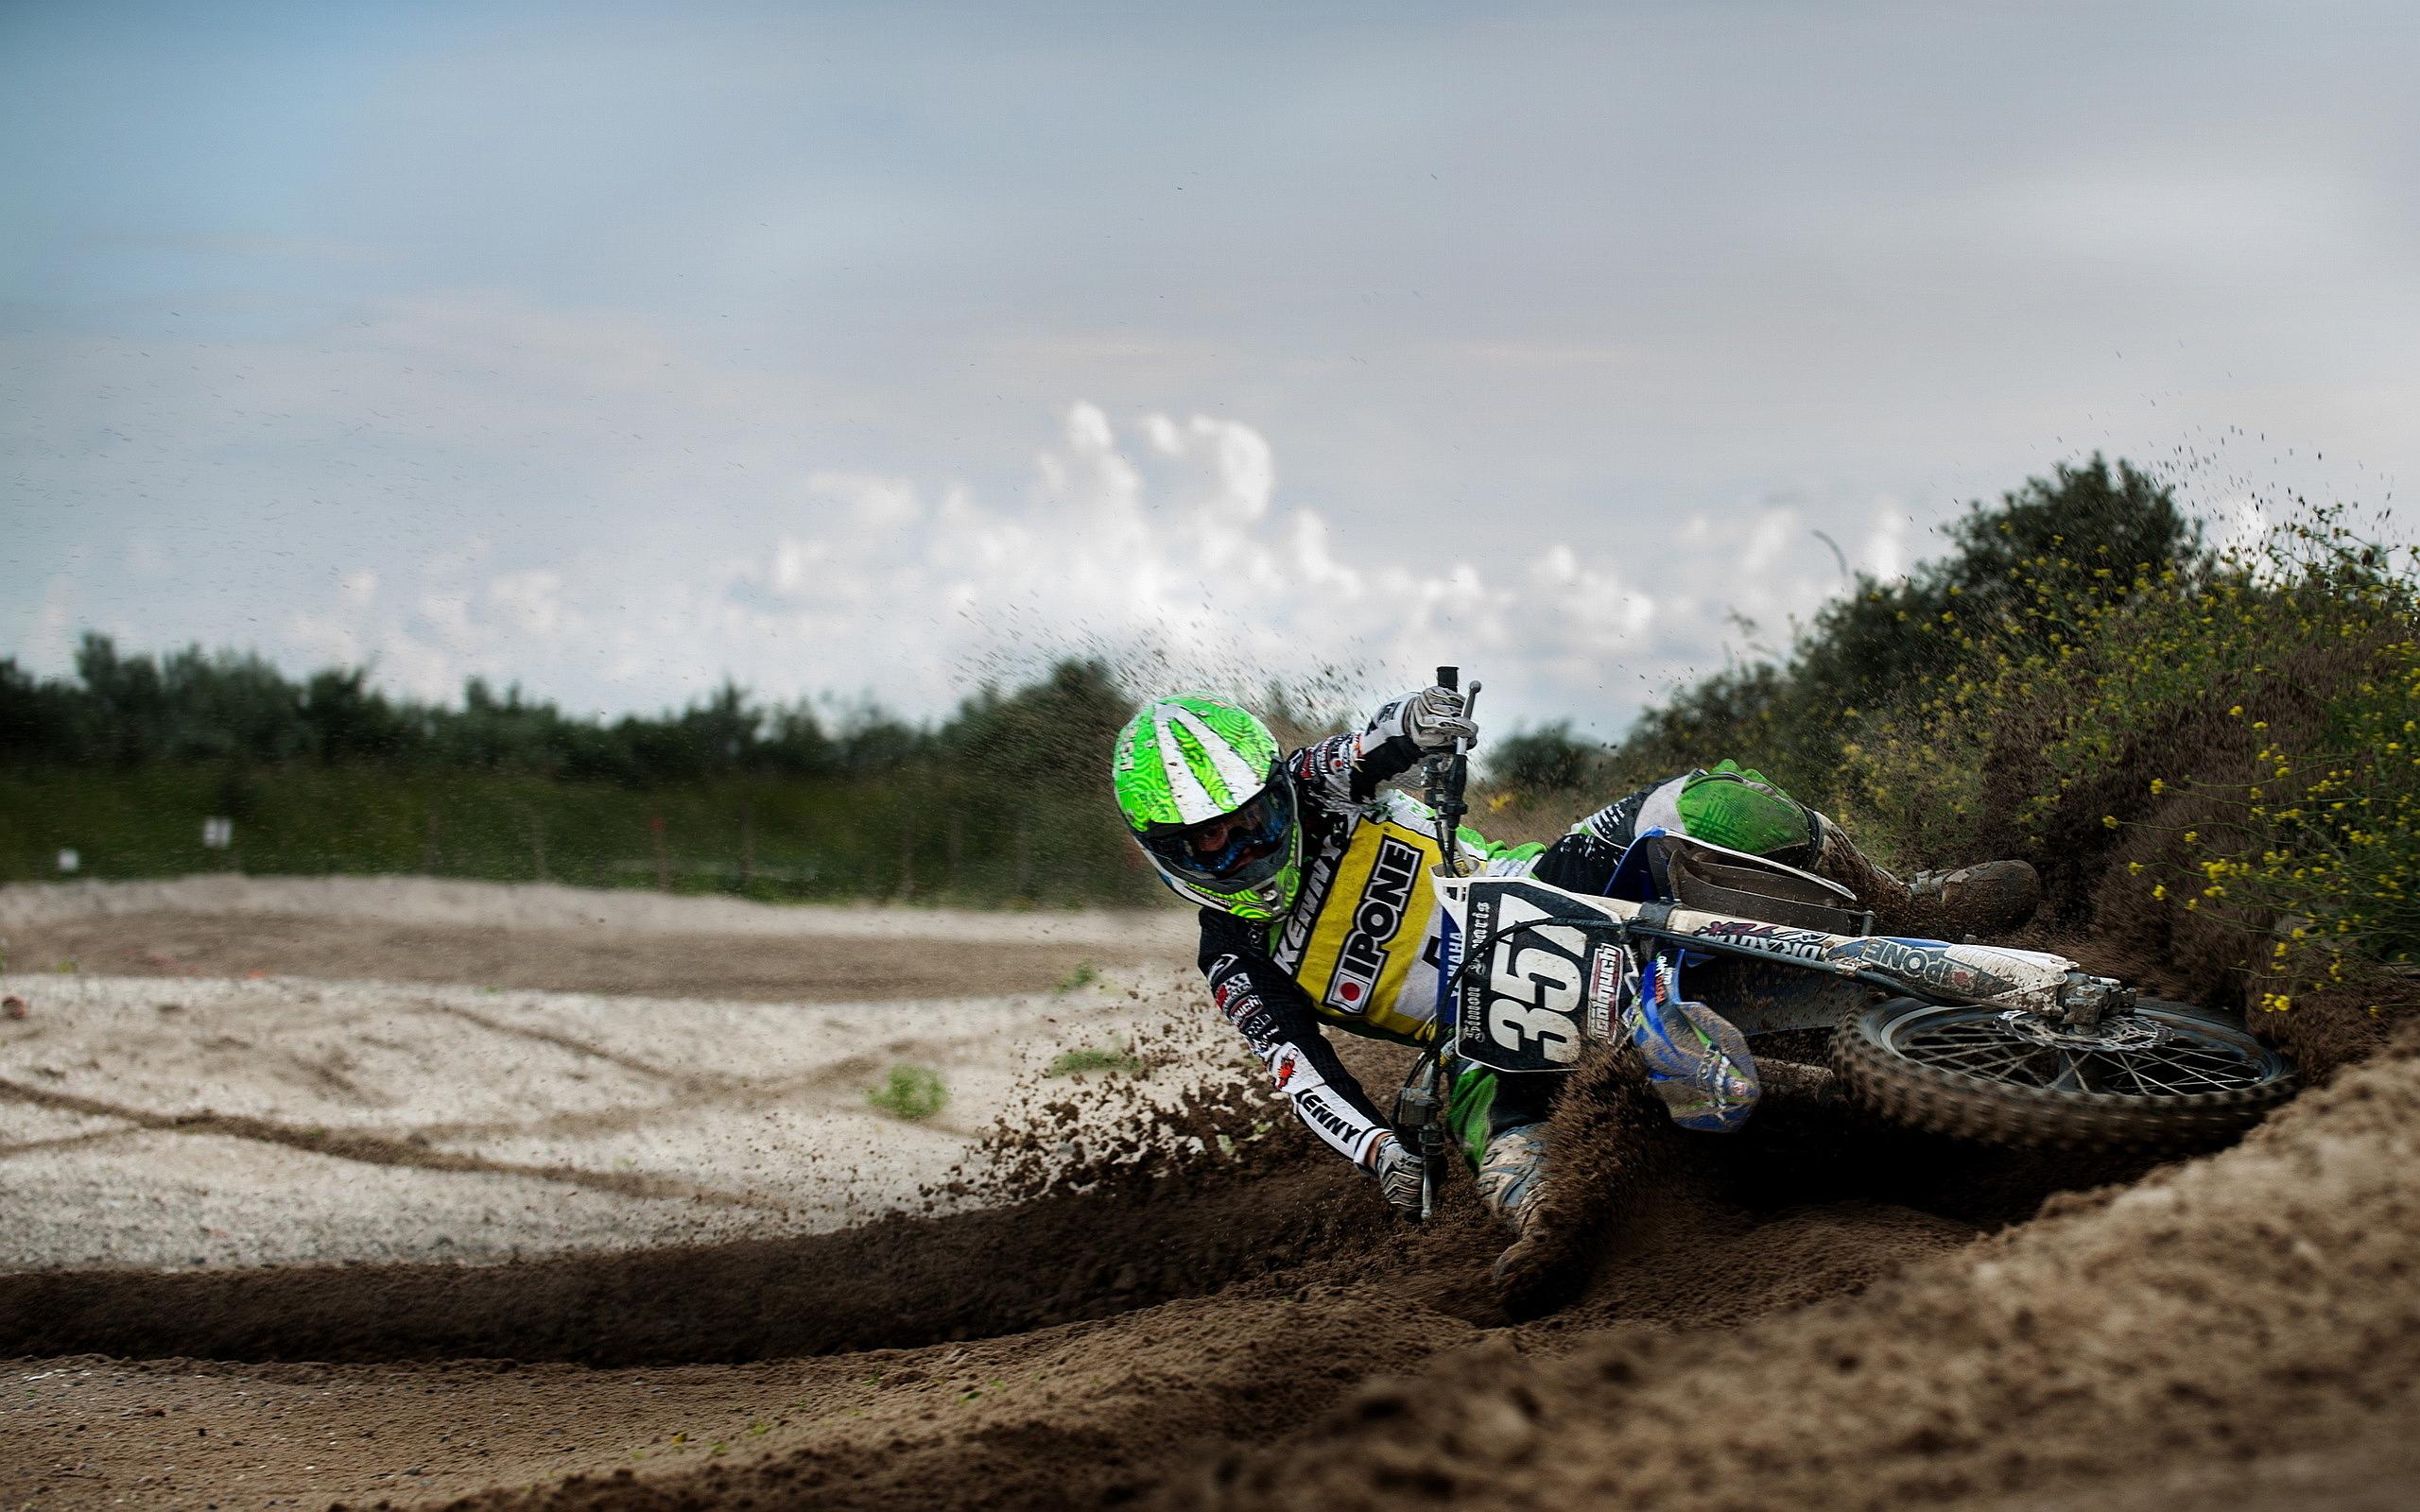 Motocross Full HD Wallpaper And Background Image 2560x1600 ID383093